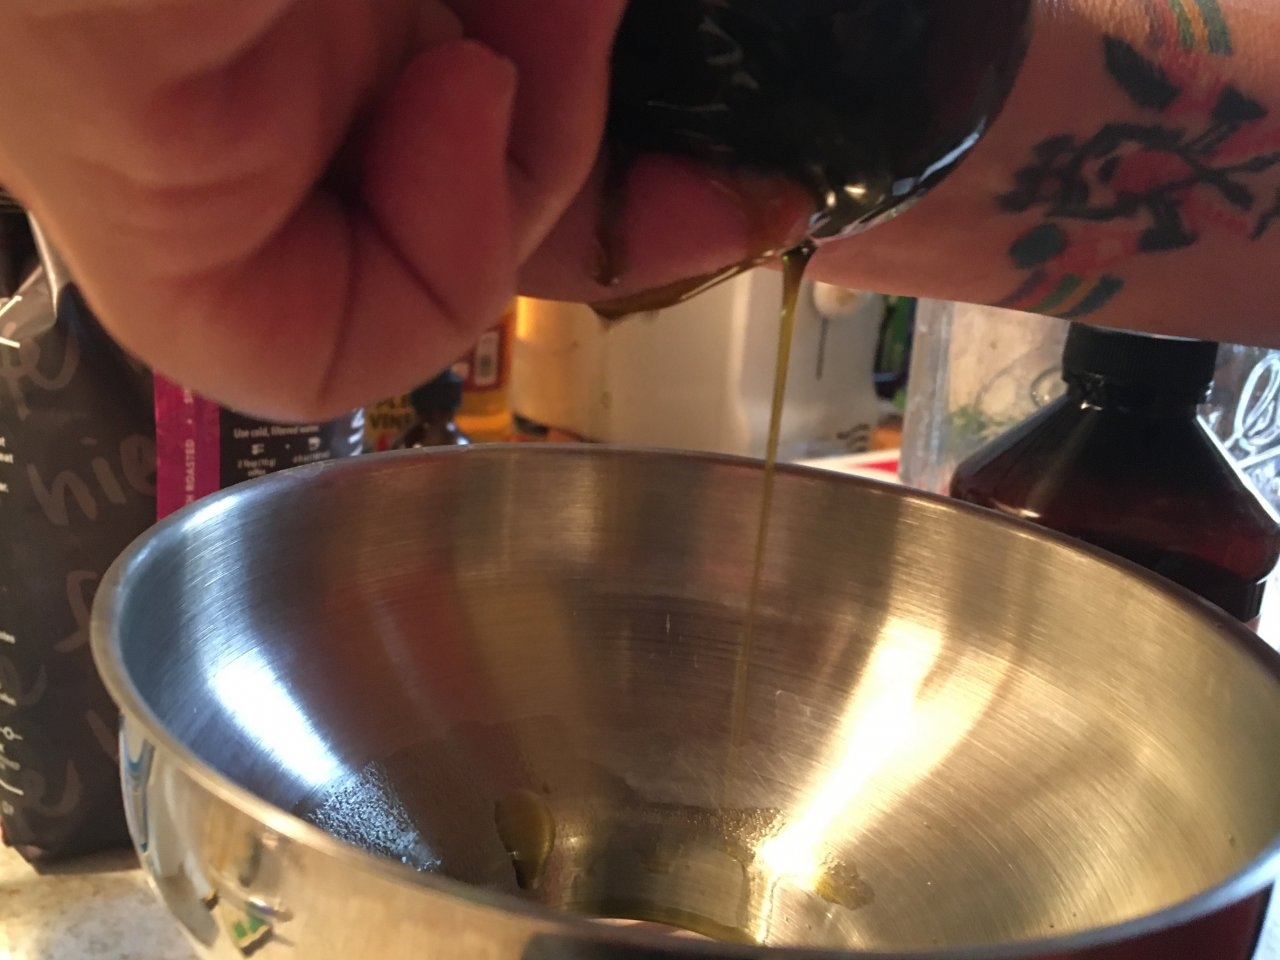 Basic infused cannabis oil